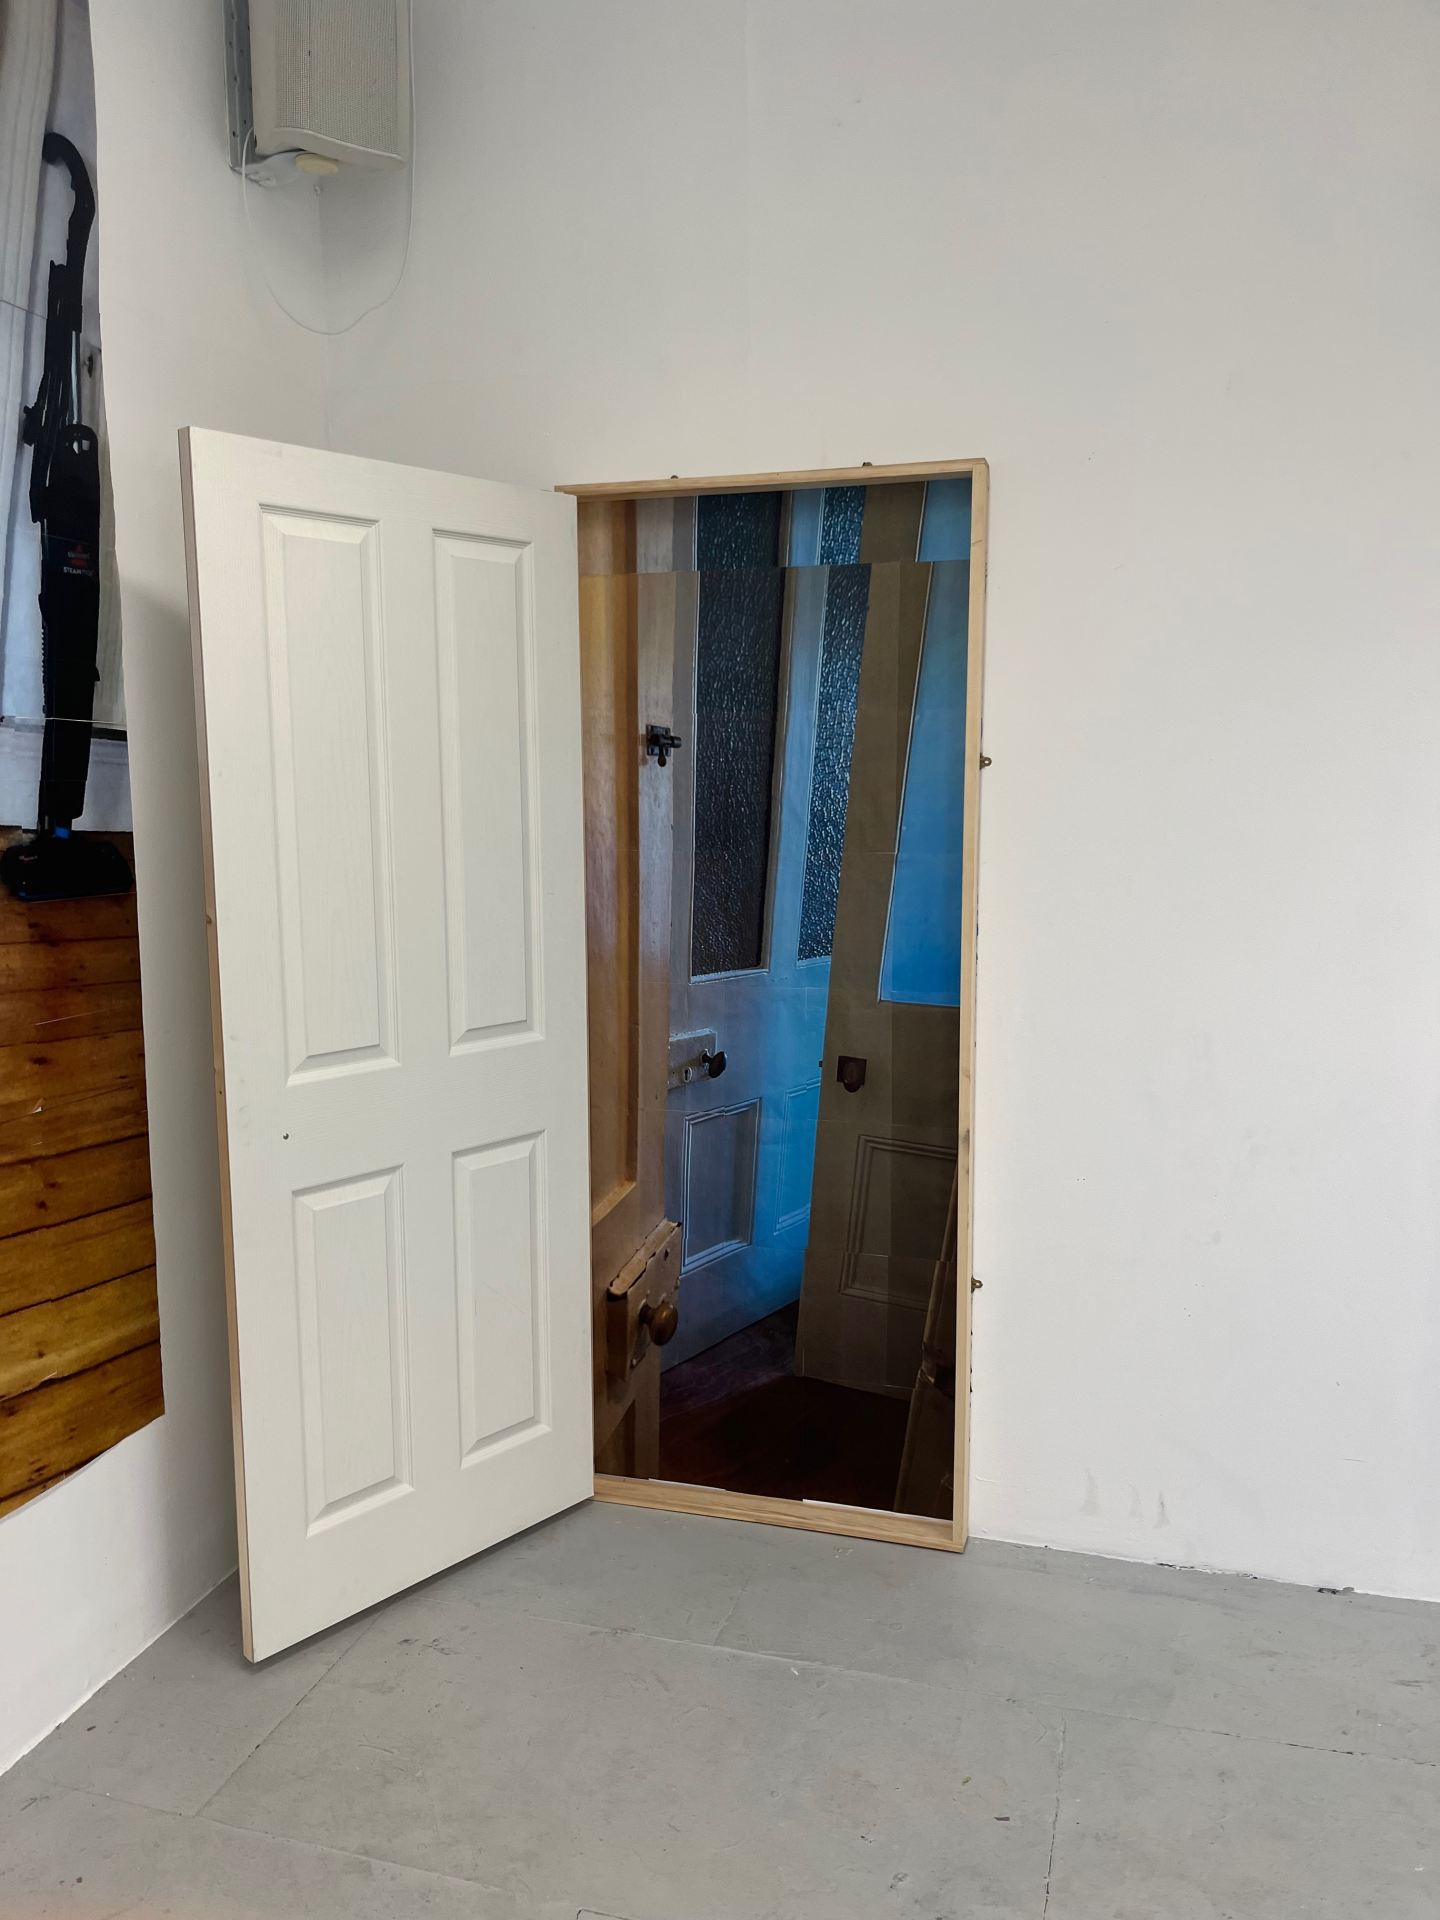 A 4-metre image constructed on the wall, layered with a still projection of an ikea bed, and a door mounted to the wall opening onto an image of multiple identical doors opening in on eachother.